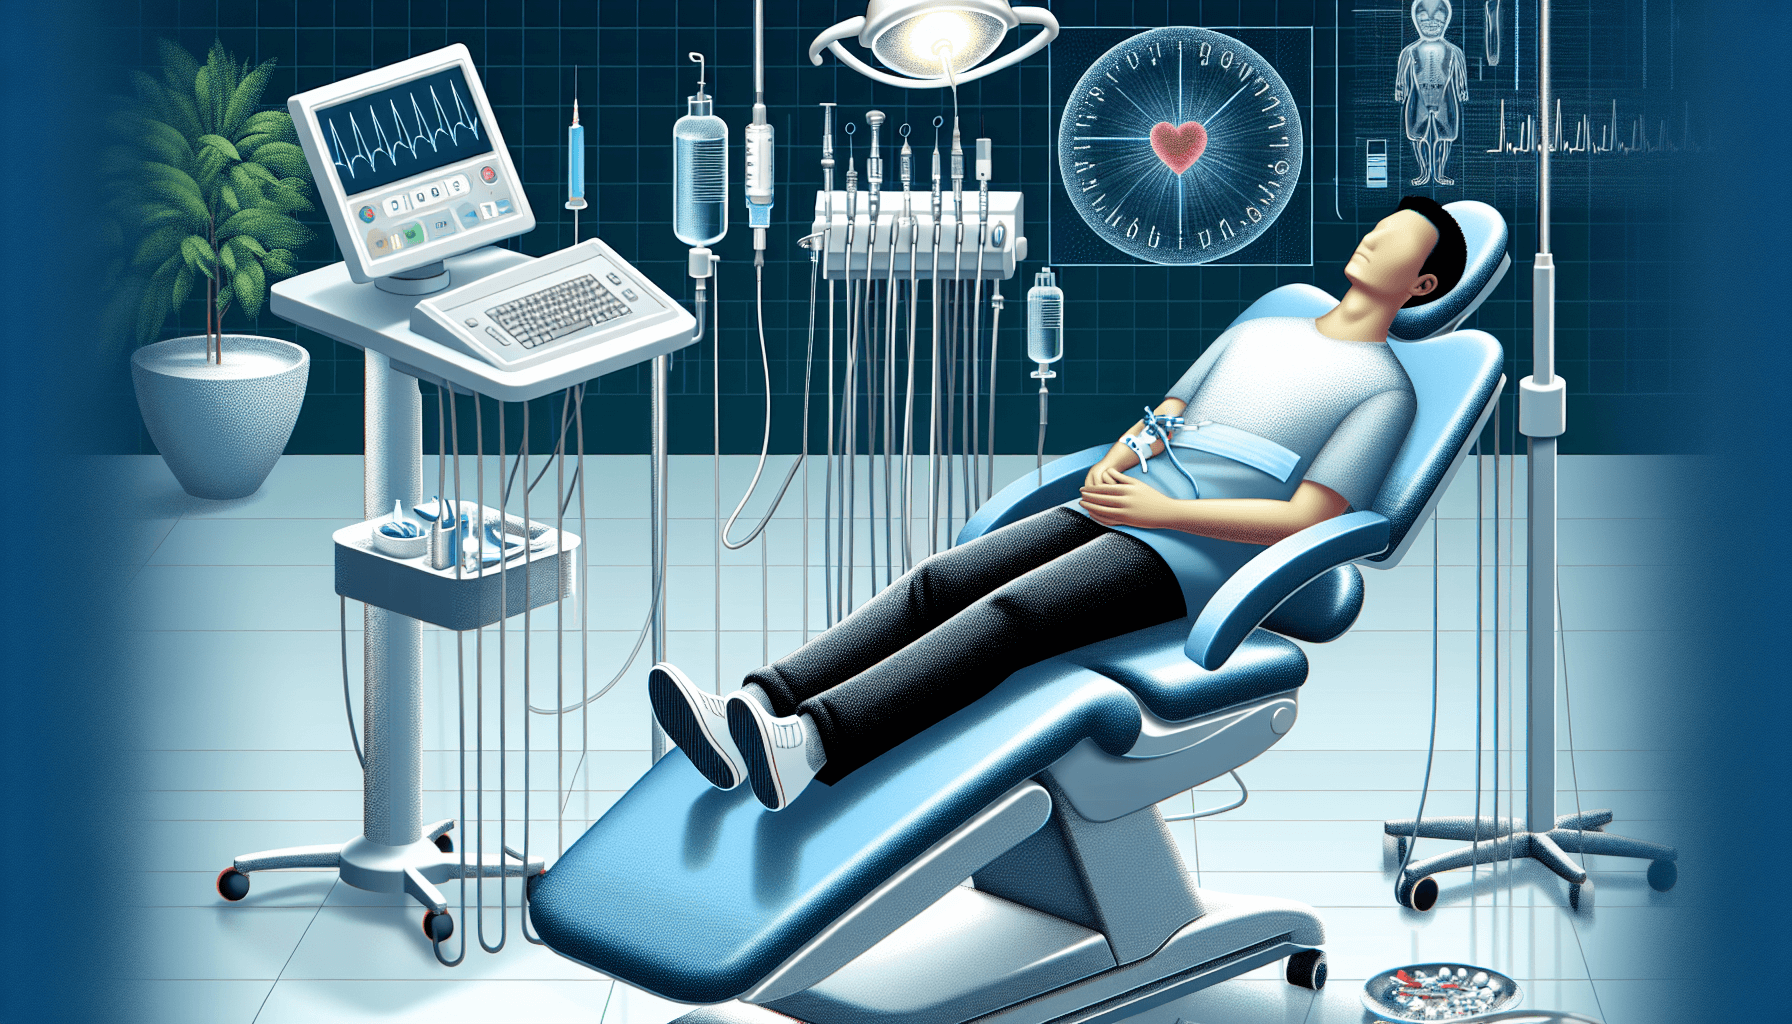 Illustration of a person receiving IV sedation with medical equipment in the background